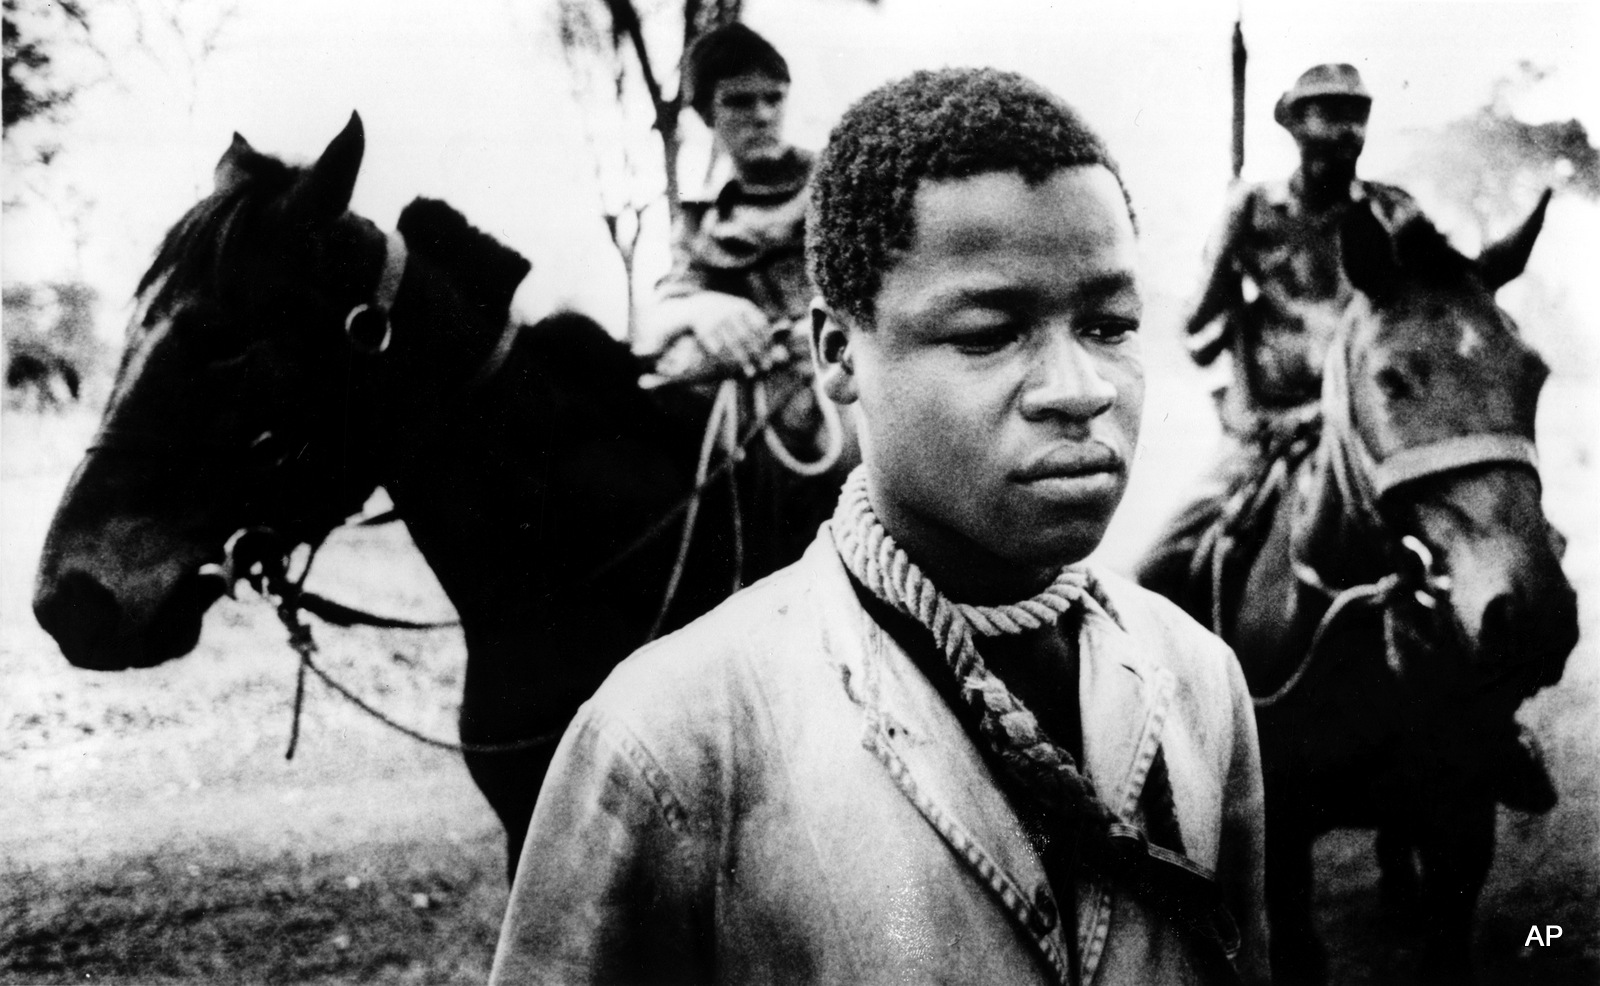 A black Rhodesian prisoner stands with a rope tied around his neck, to prevent escape, placed there by Rhodesian cavalrymen, background, who detain him for questioning in Lupane, Southern Rhodesia in Sept. 1977. Rhodesia's white-dominated government is countering black Rhodesian guerrilla activities with militant armed forces. 